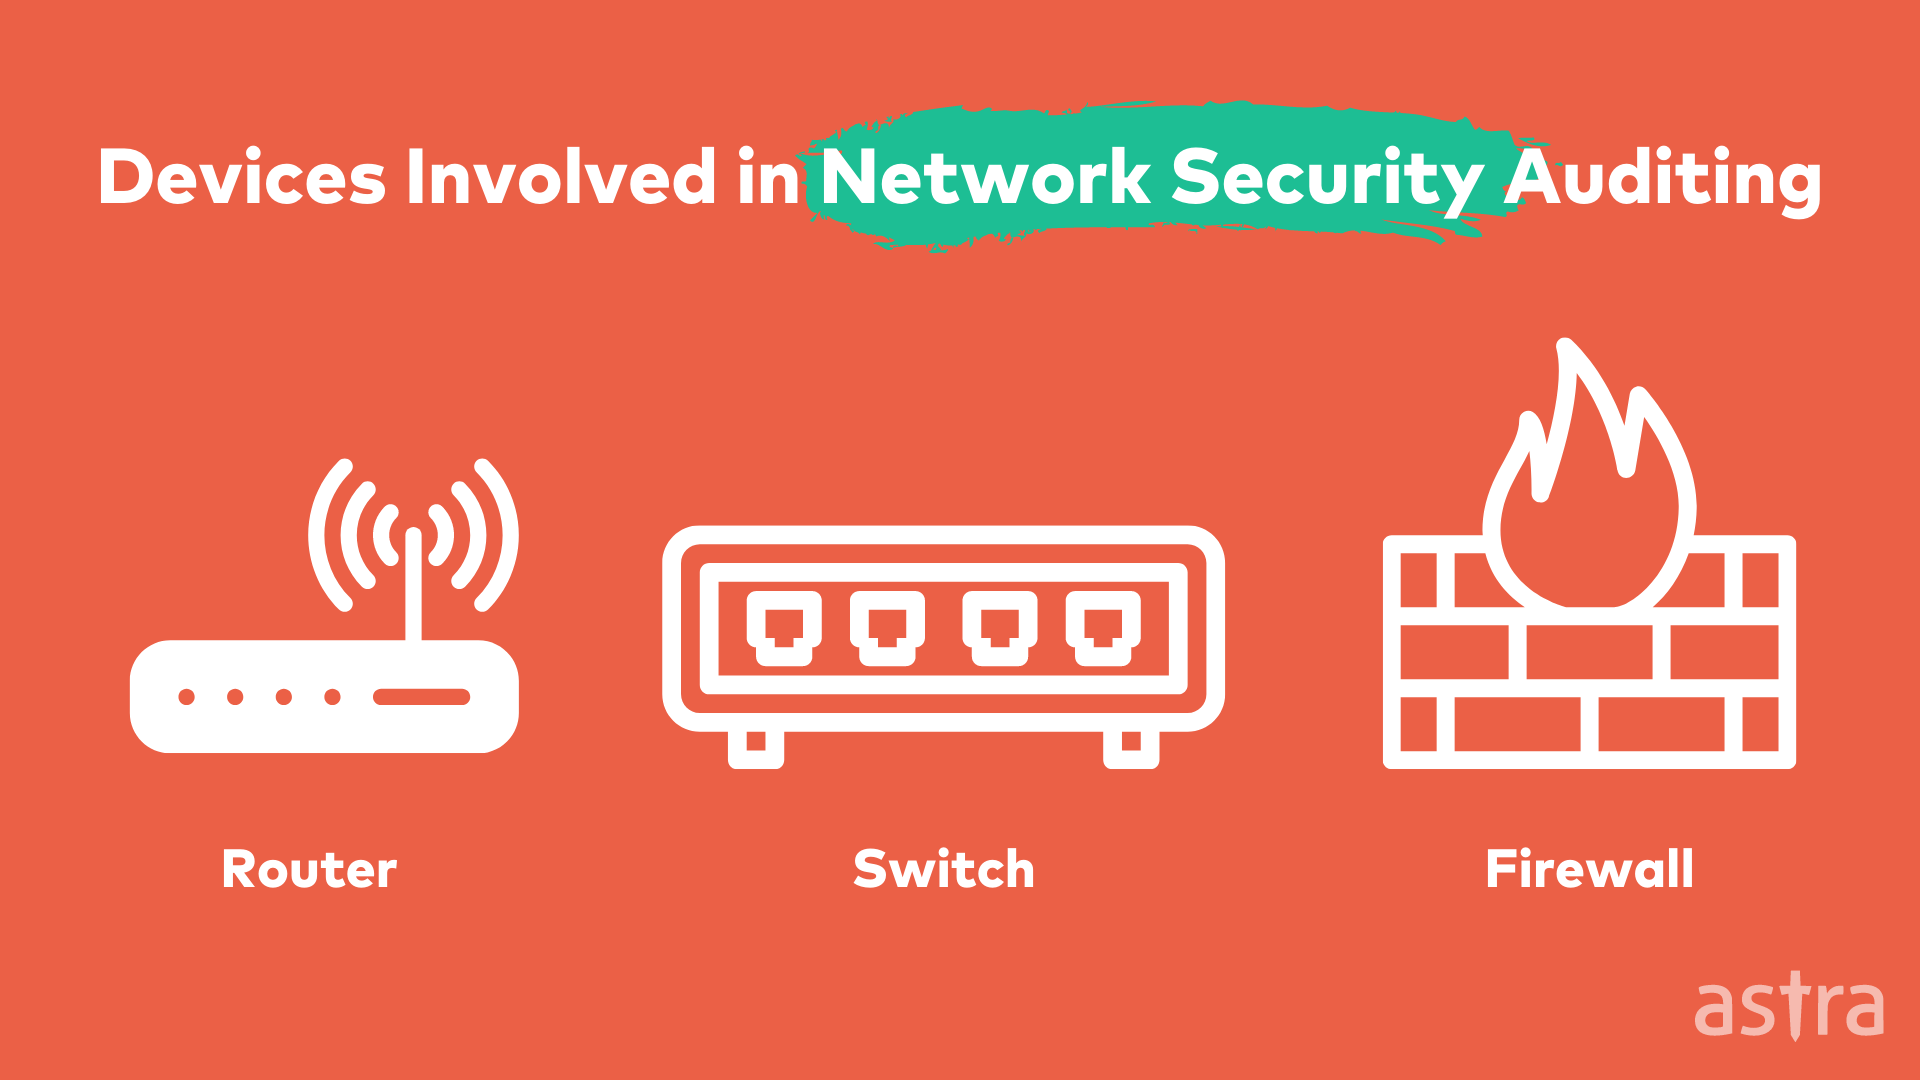 Devices included in Network Vulnerability Scanning